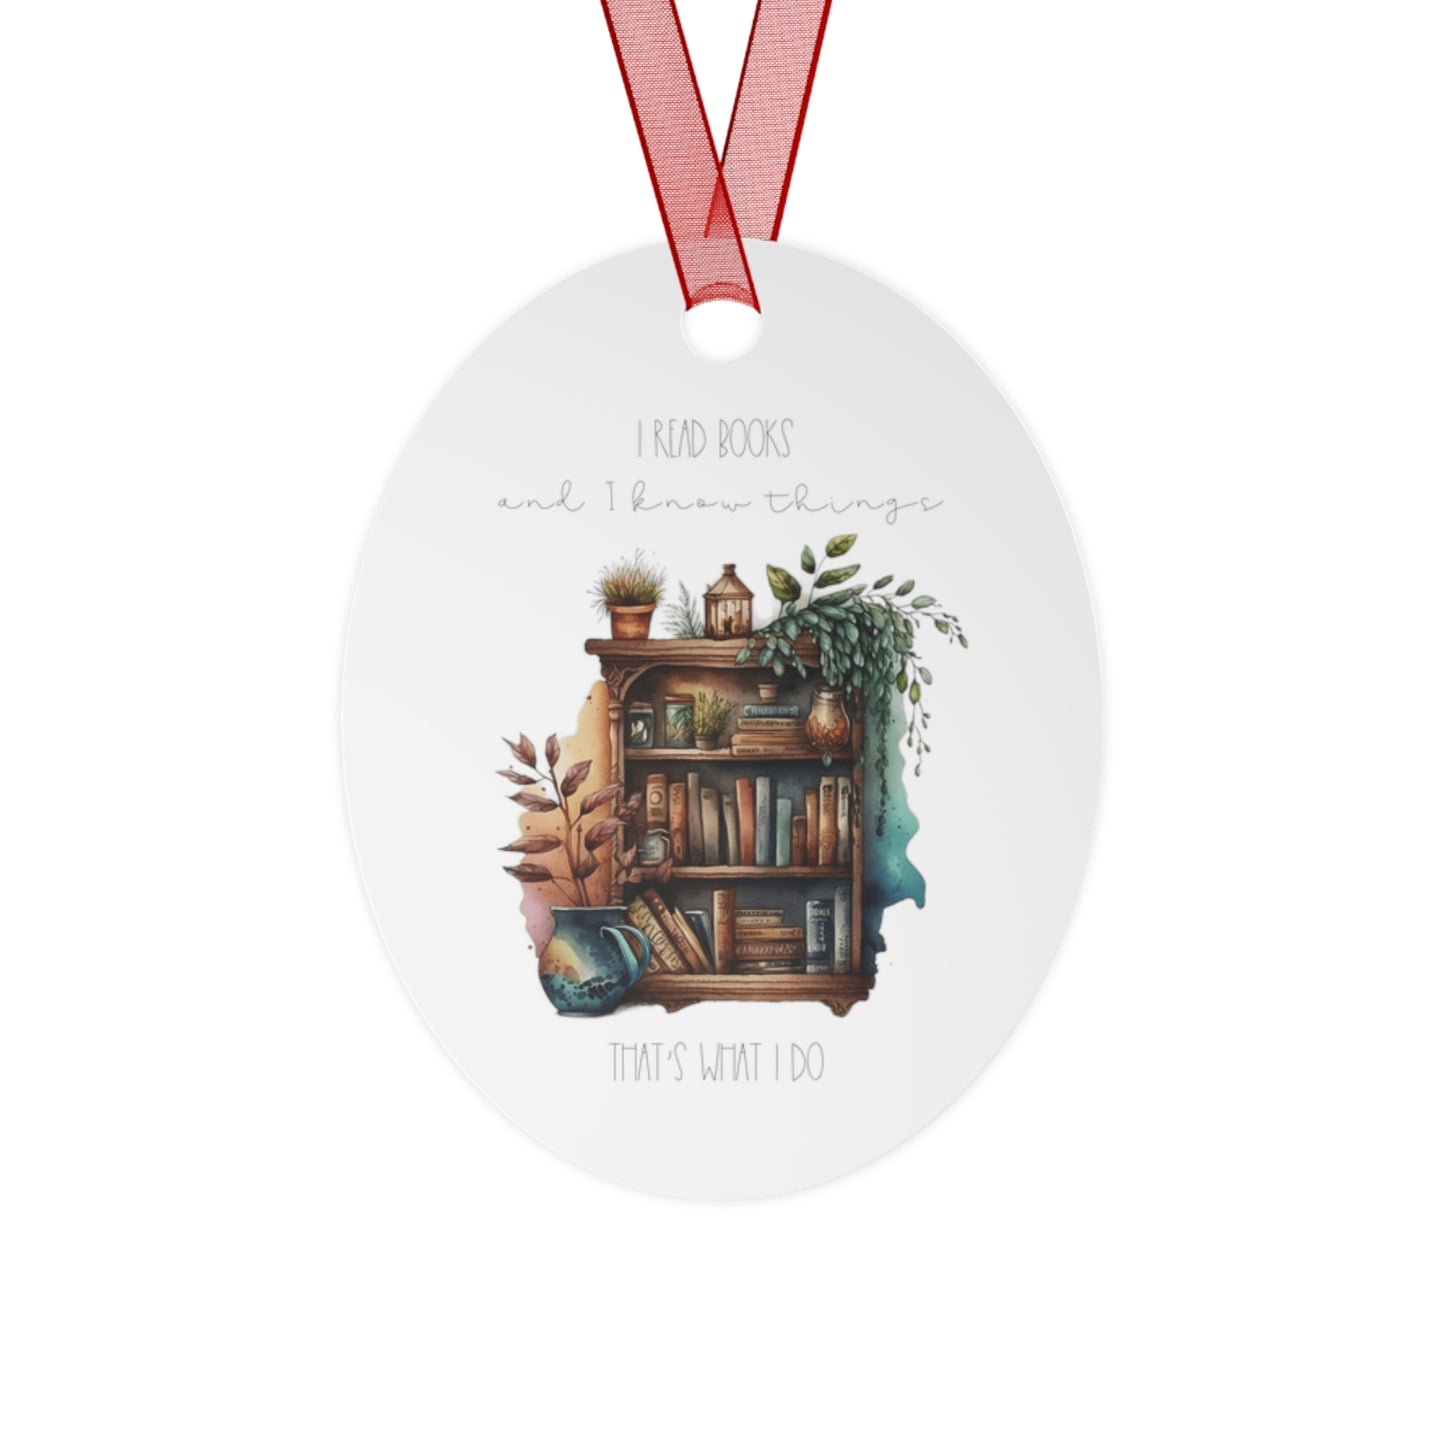 Oval Metal Ornament “I read books and I know things. That’s what I do.”